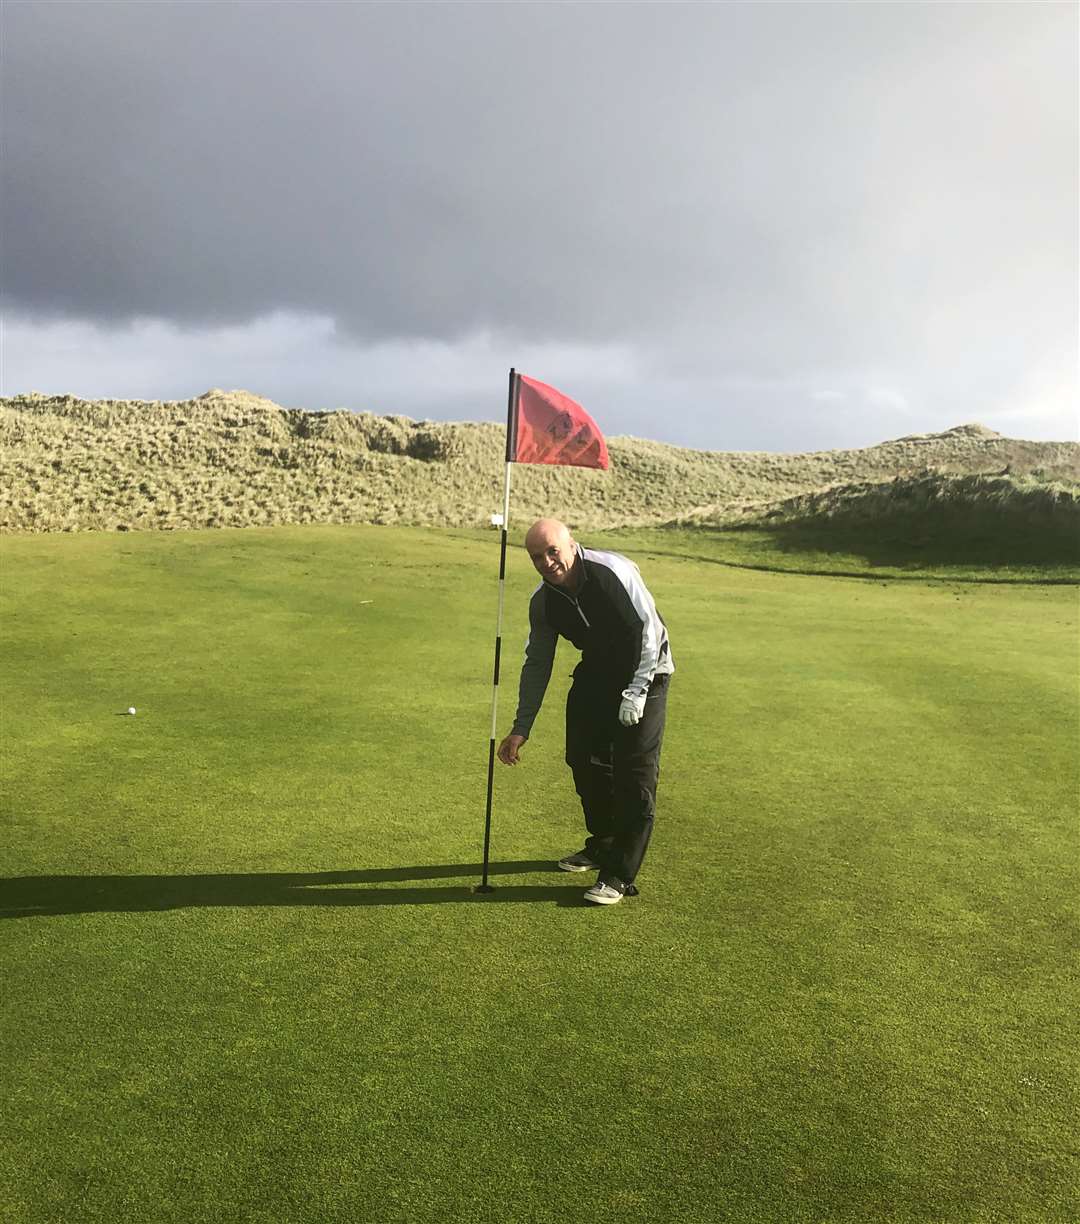 Billy Ferries retrieving his ball after his hole in one at Wick.